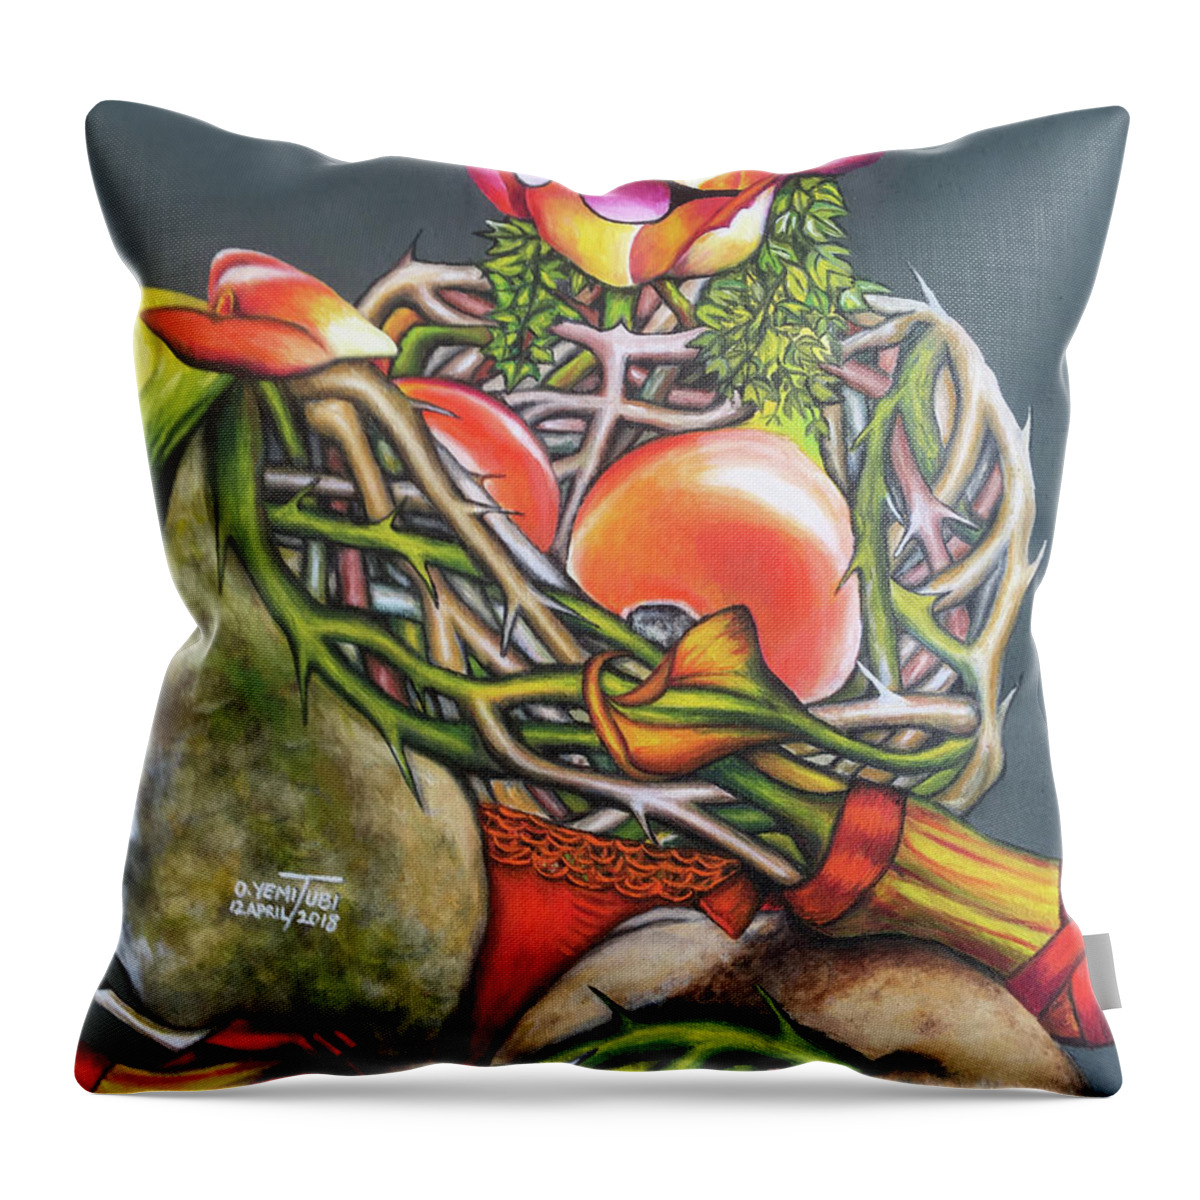 Abuse Throw Pillow featuring the painting SENSUALITY1 Pain and Pleasure by O Yemi Tubi